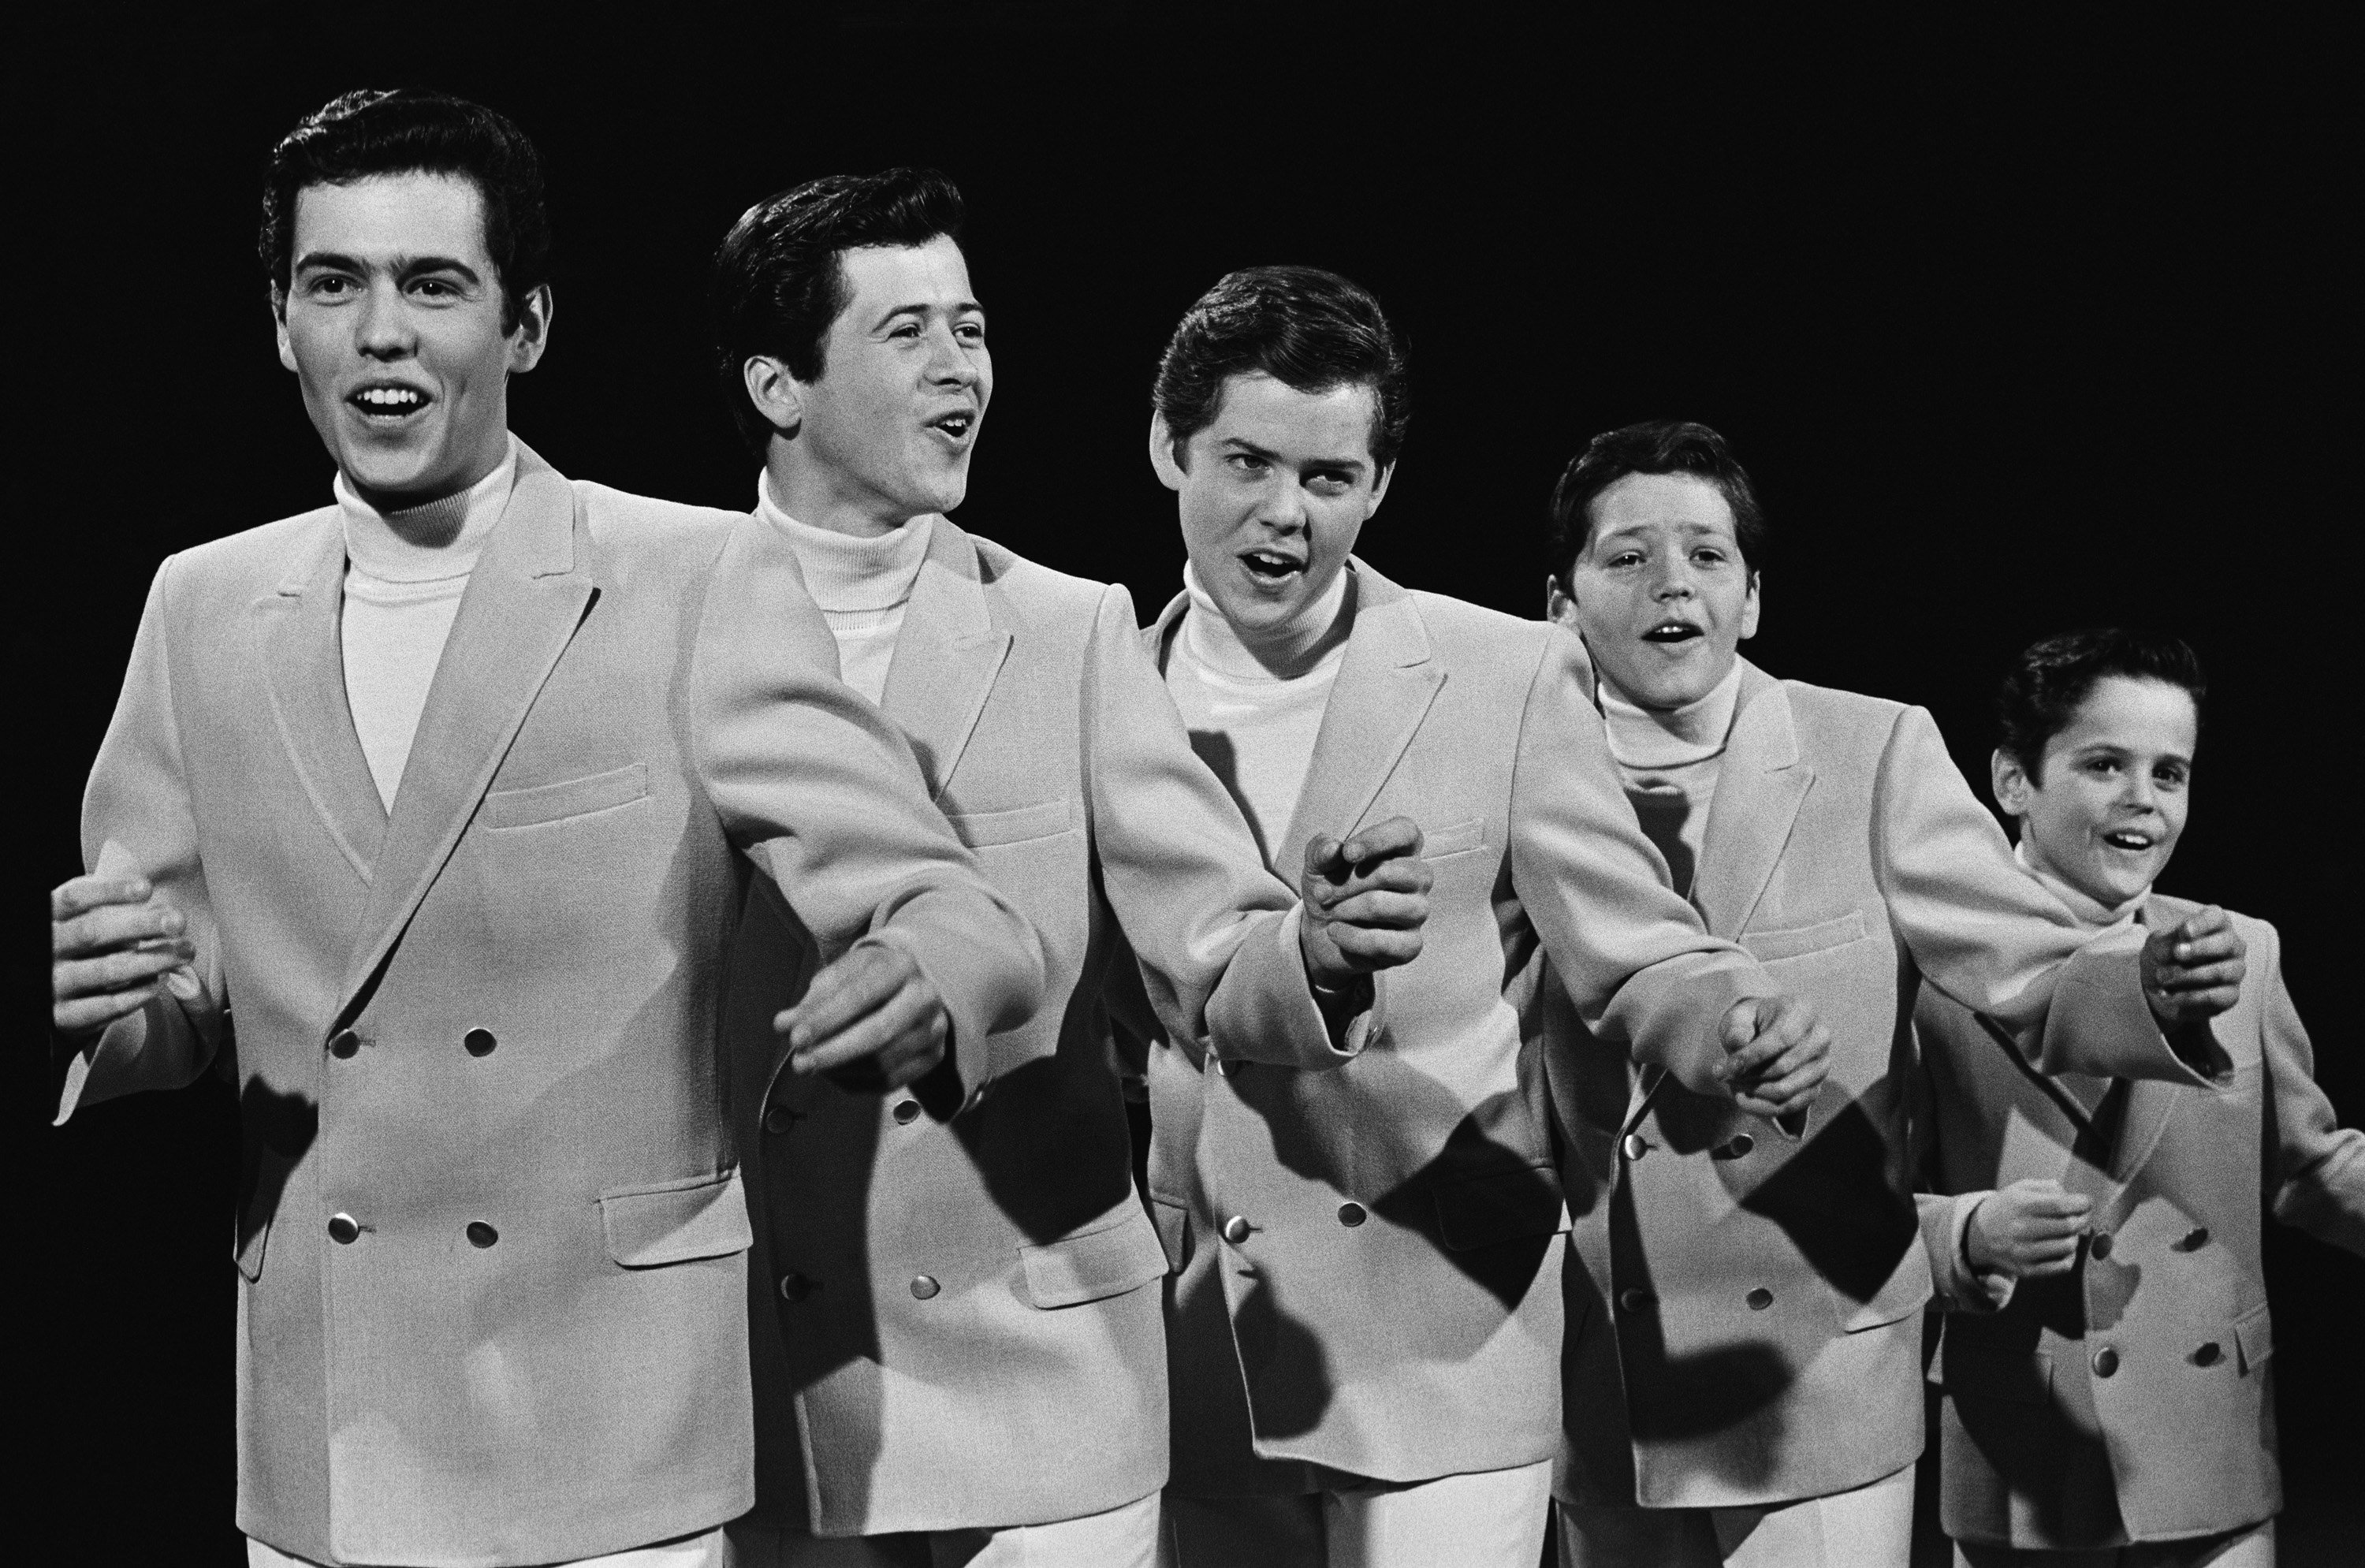 The Osmonds, Alan, Wayne, Merrill, Jay, and Donny Osmond singing "Then I'll Be Happy" on "The Jerry Lewis Show" on December 22, 1967. | Source: Getty Images